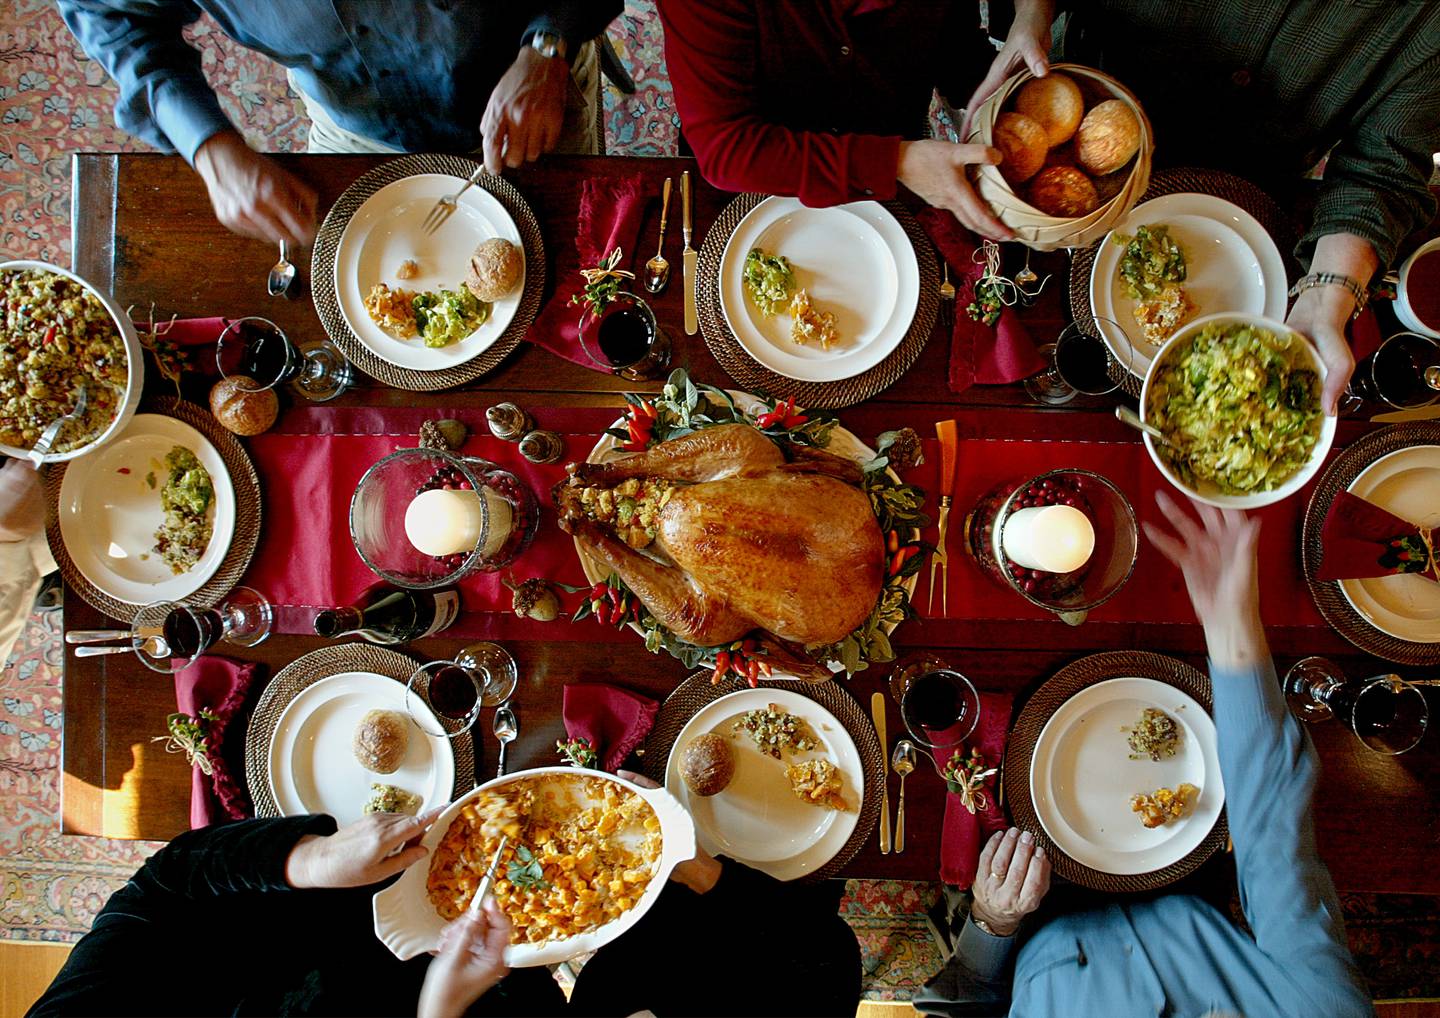 A meal to linger over will be the theme for Thursday's Thanksgiving dinner family gathering dinner party based around the turkey.